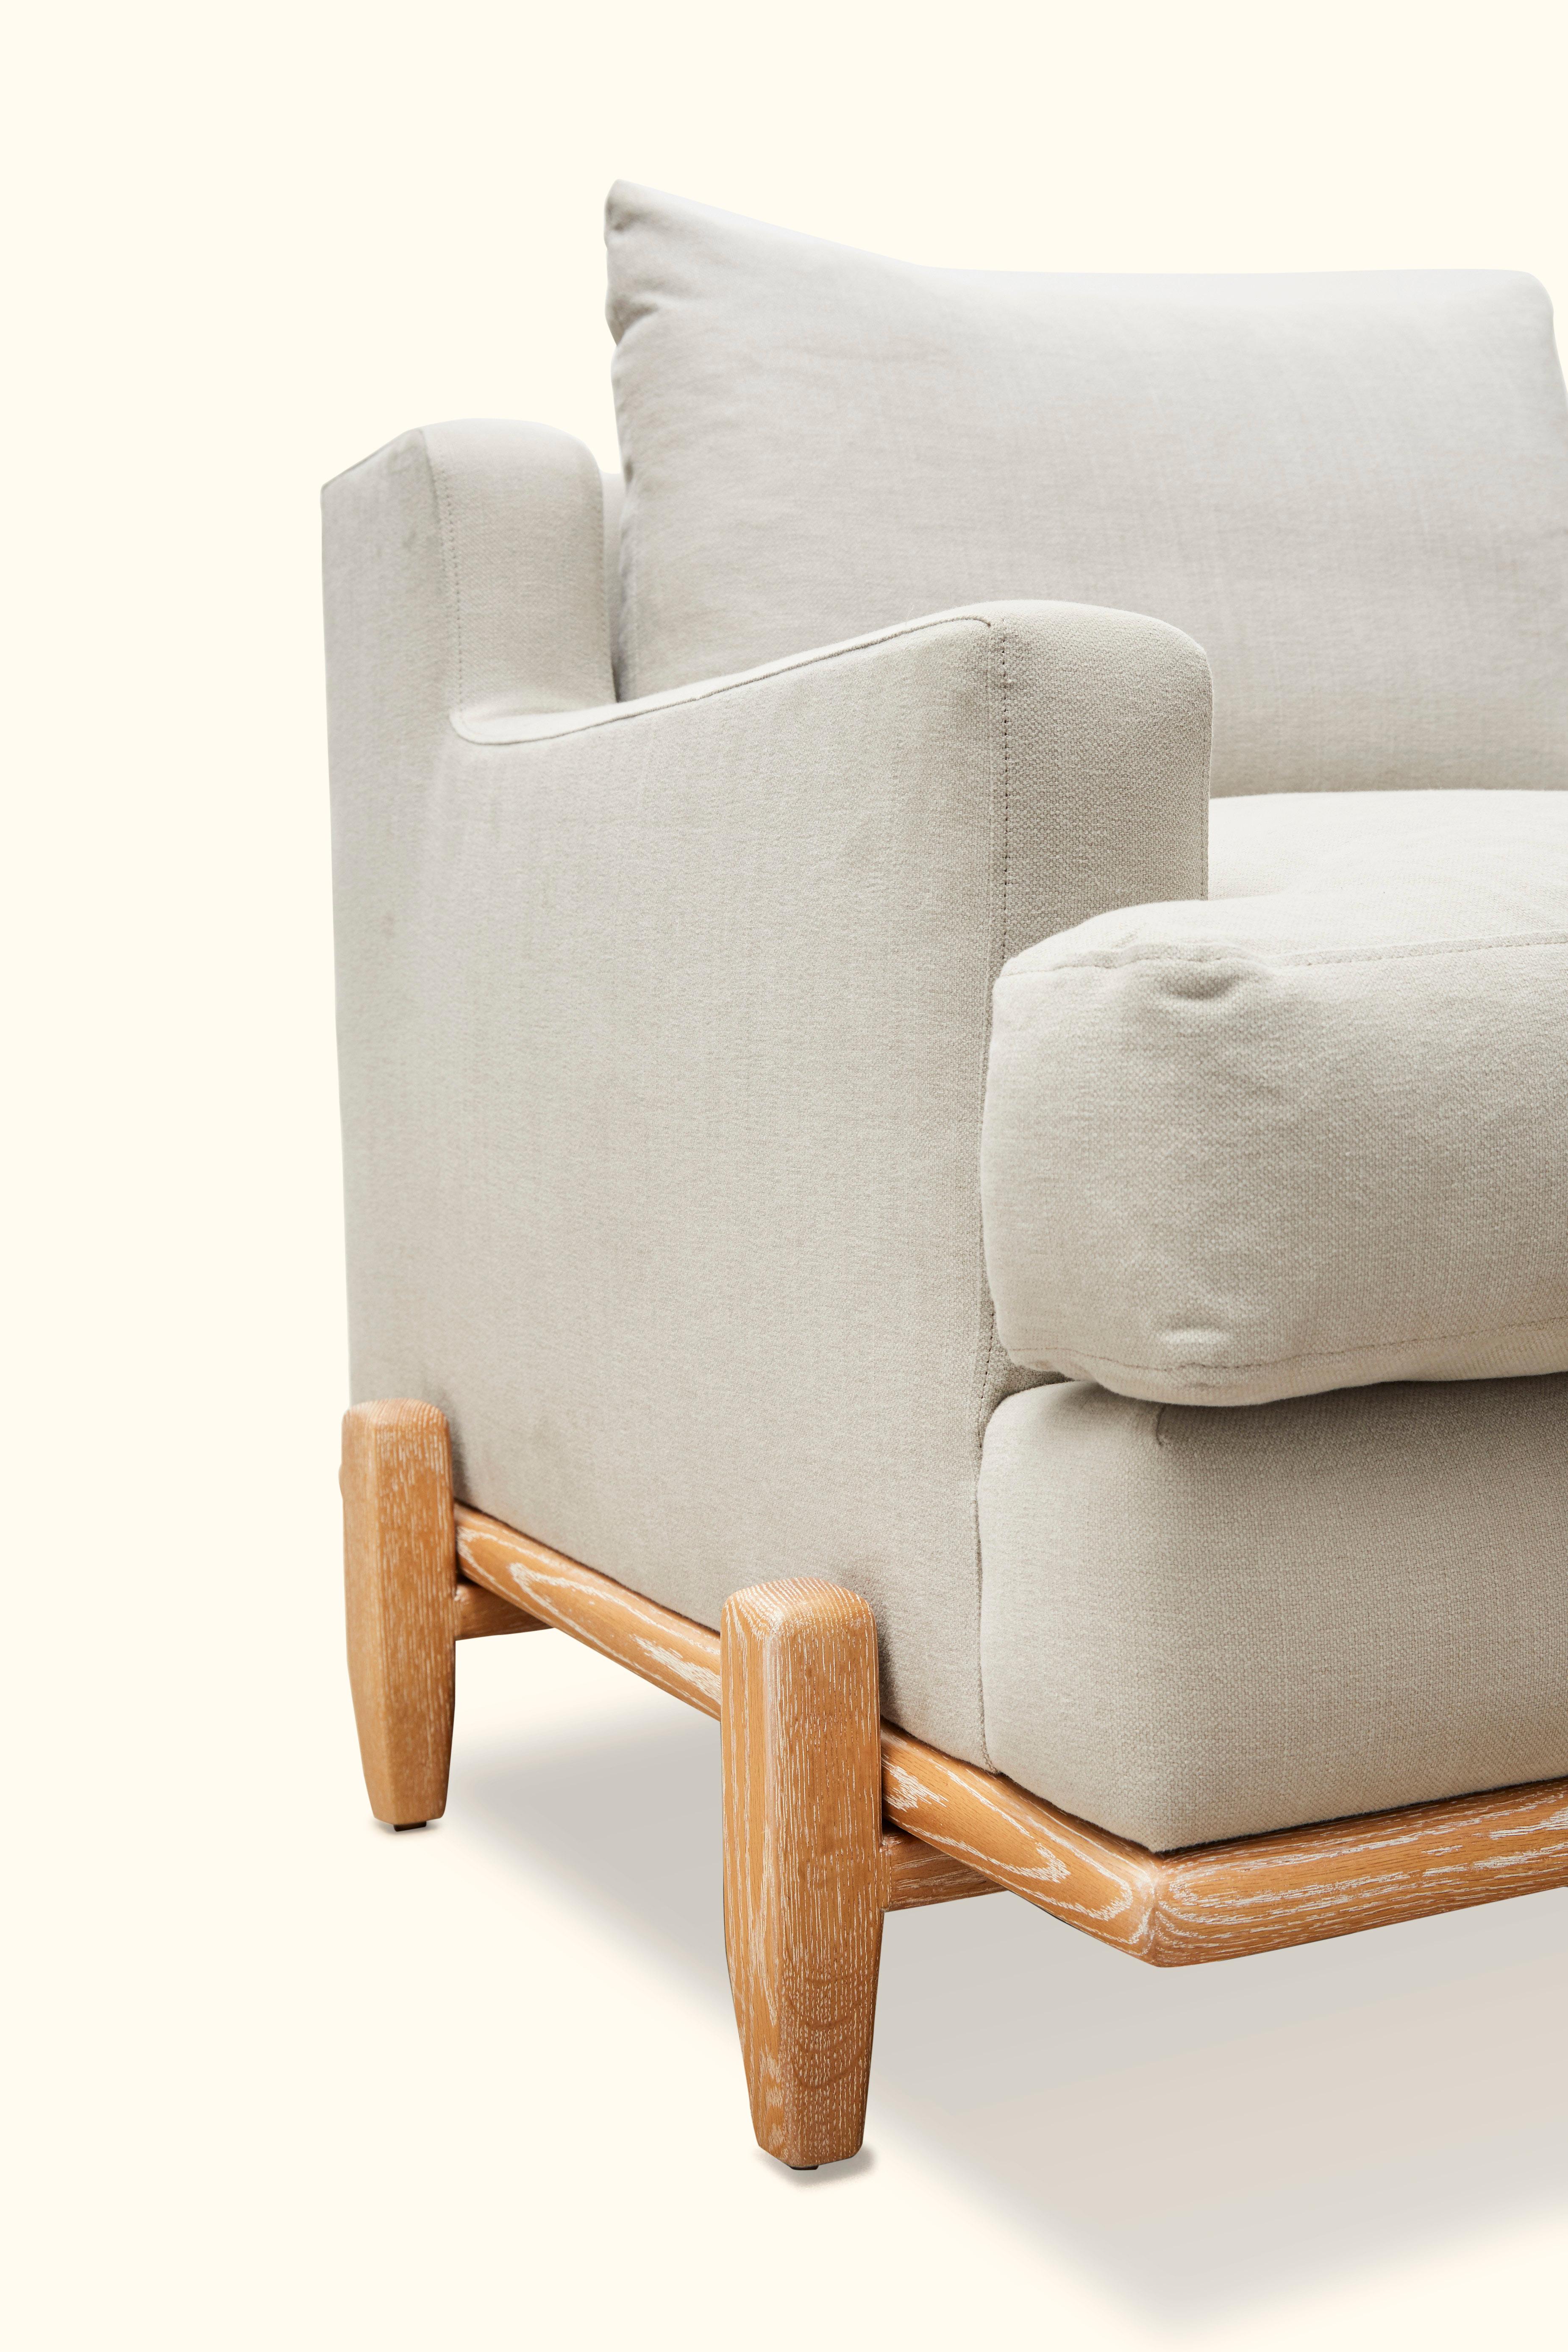 Carved White Linen and Oak George Chair by Brian Paquette for Lawson-Fenning